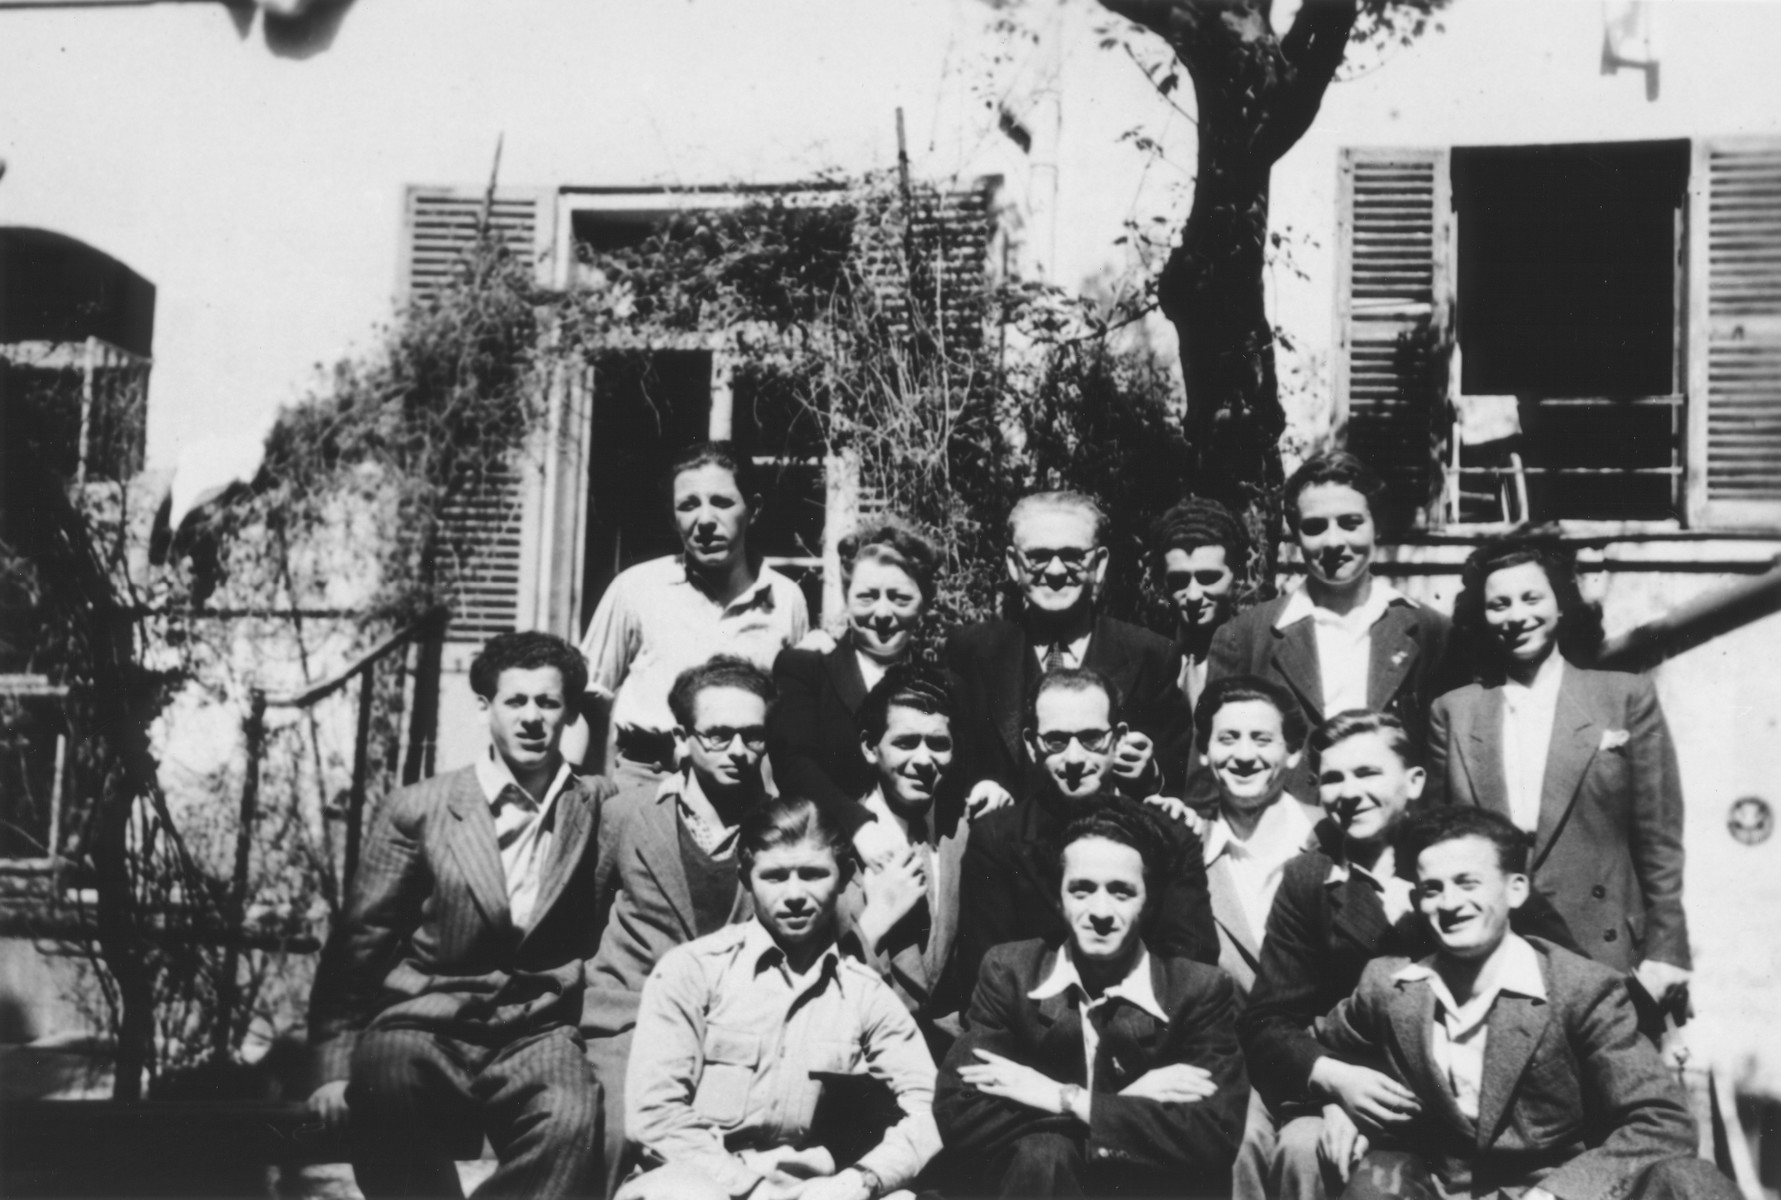 Group portrait of the staff and youth of the OSE children's home on the rue Rollin in Paris.

Pictured from left to right are: Front row: Joseph Magier, Gerson, Asher Greenberg.  Middle row: Lazer Greenberg, unidentified, Peretz Fogel, Joseph Szwarcberg and unidentified.  Top row: Willy Fogel, an elderly couple who brought food to the home, unidentified and Eddie Balter.